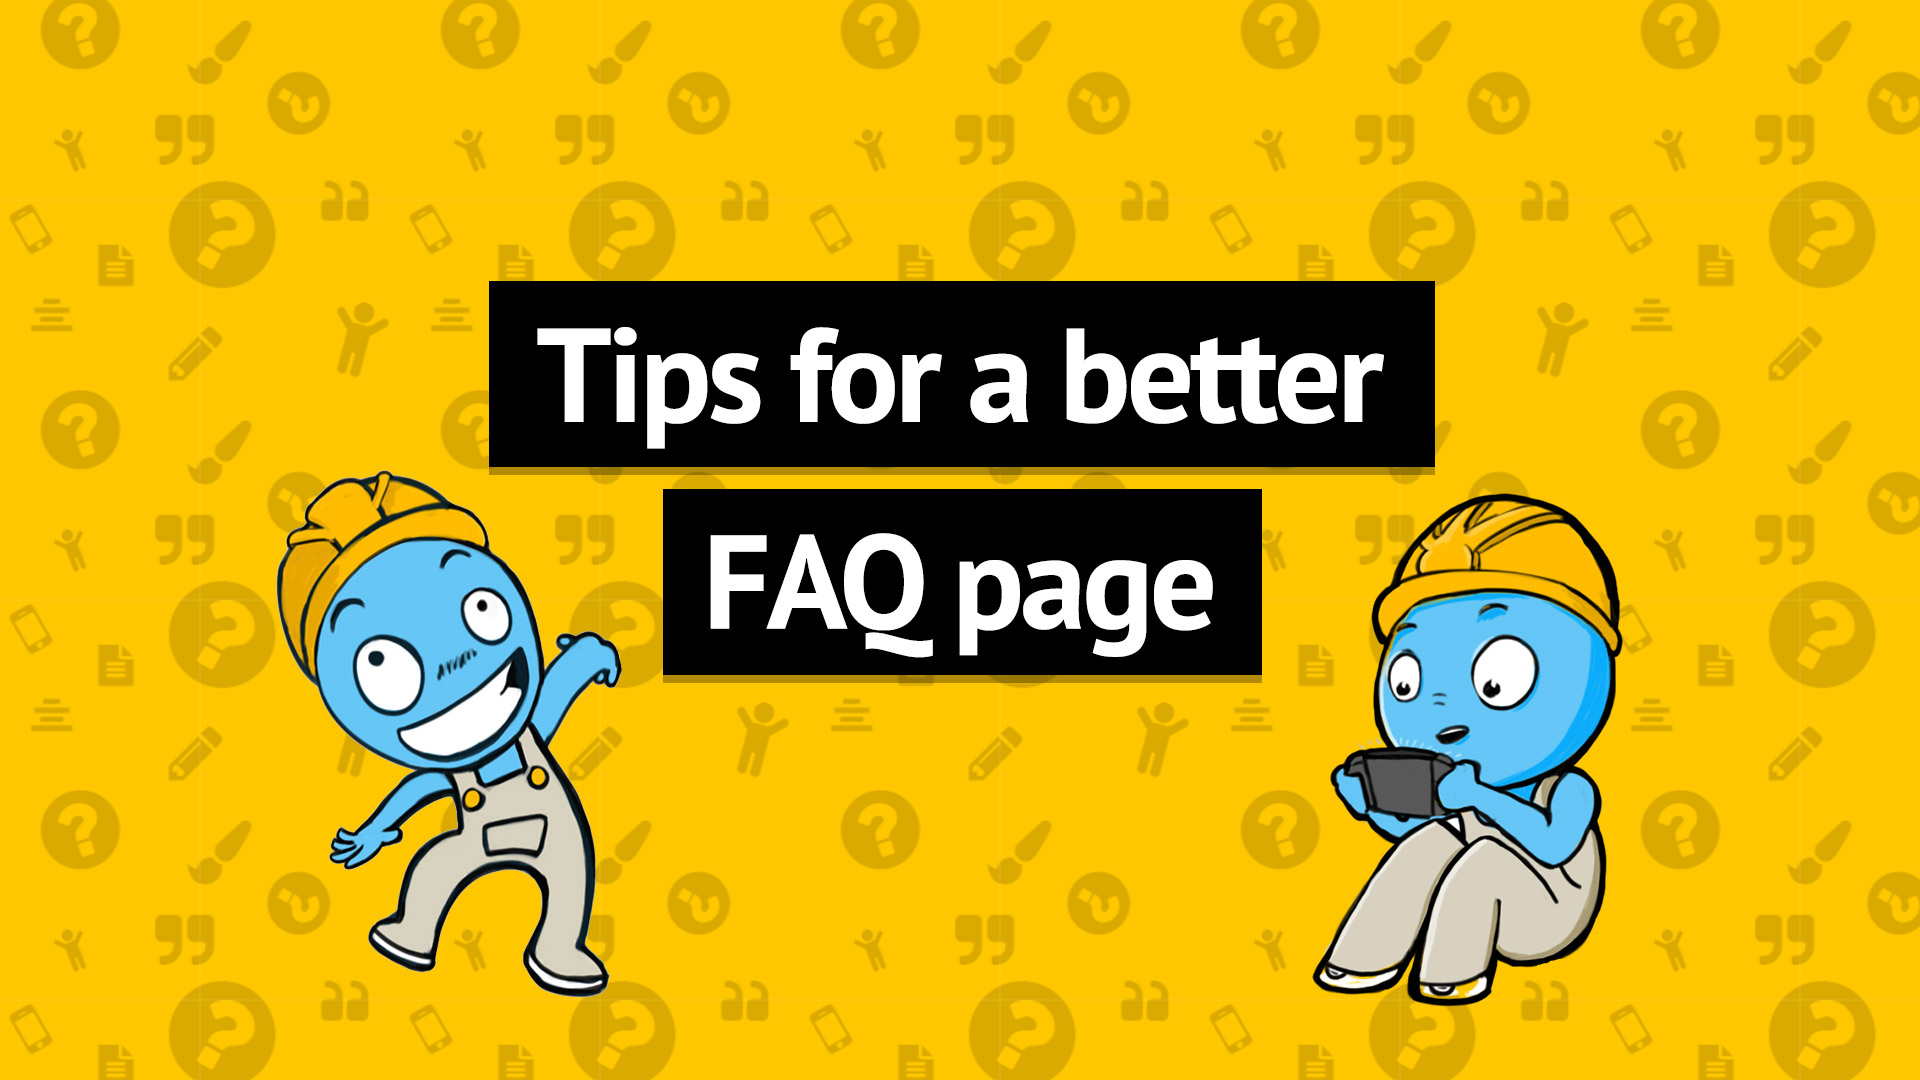 Tips for a better FAQ page